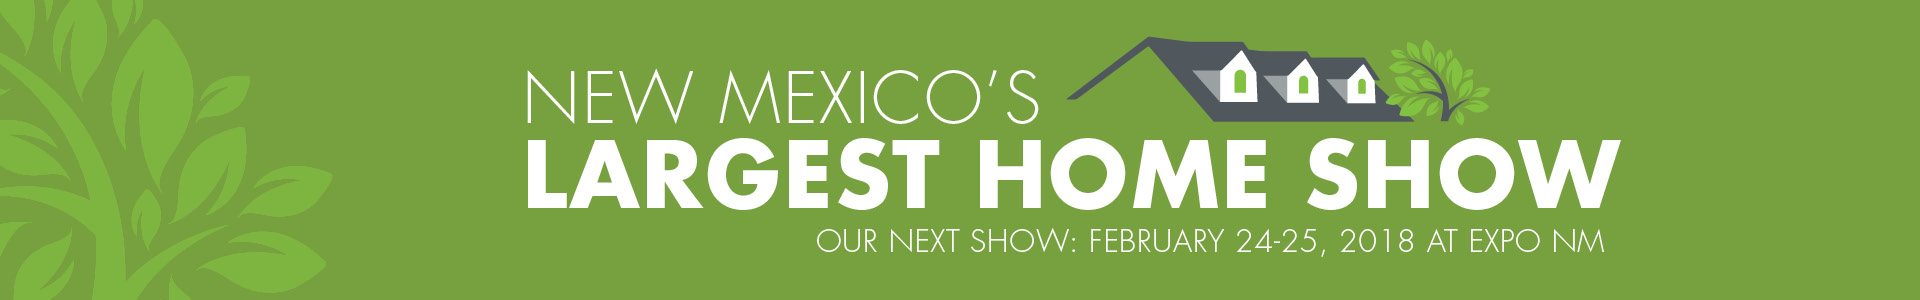 2018 Albuquerque Home Remodeling and Lifestyle Show